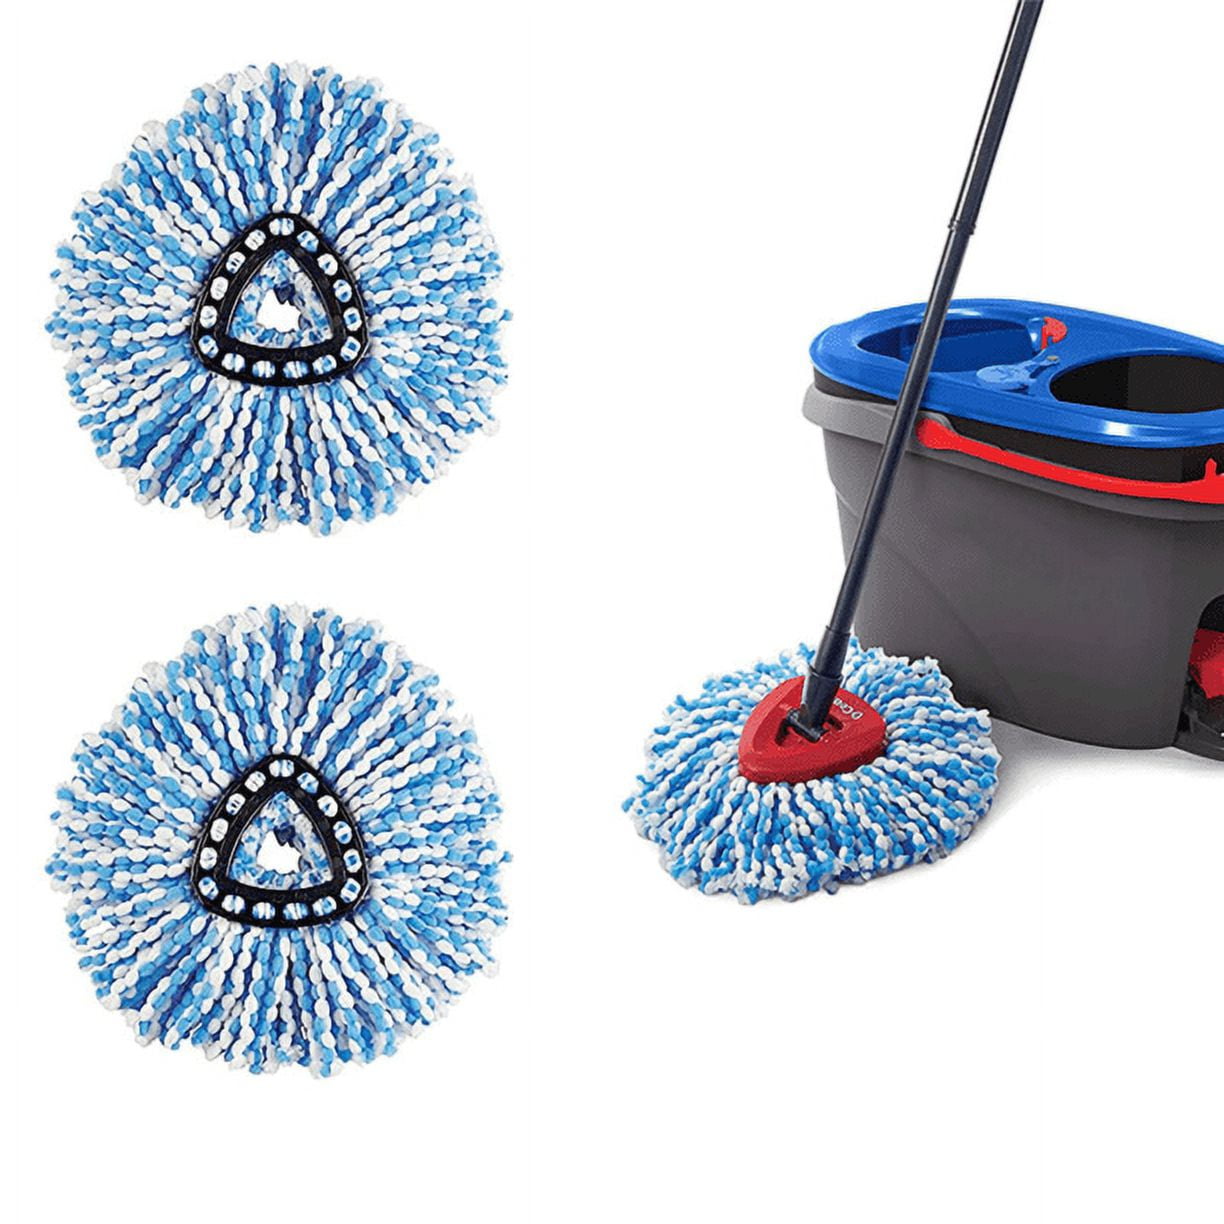 Microfiber Cotton Spin Mop Heads Replacement - 5 Pack Refills Compatible  360 Spinning Magic Mops - Round Shape Standard Size M - AliExpress